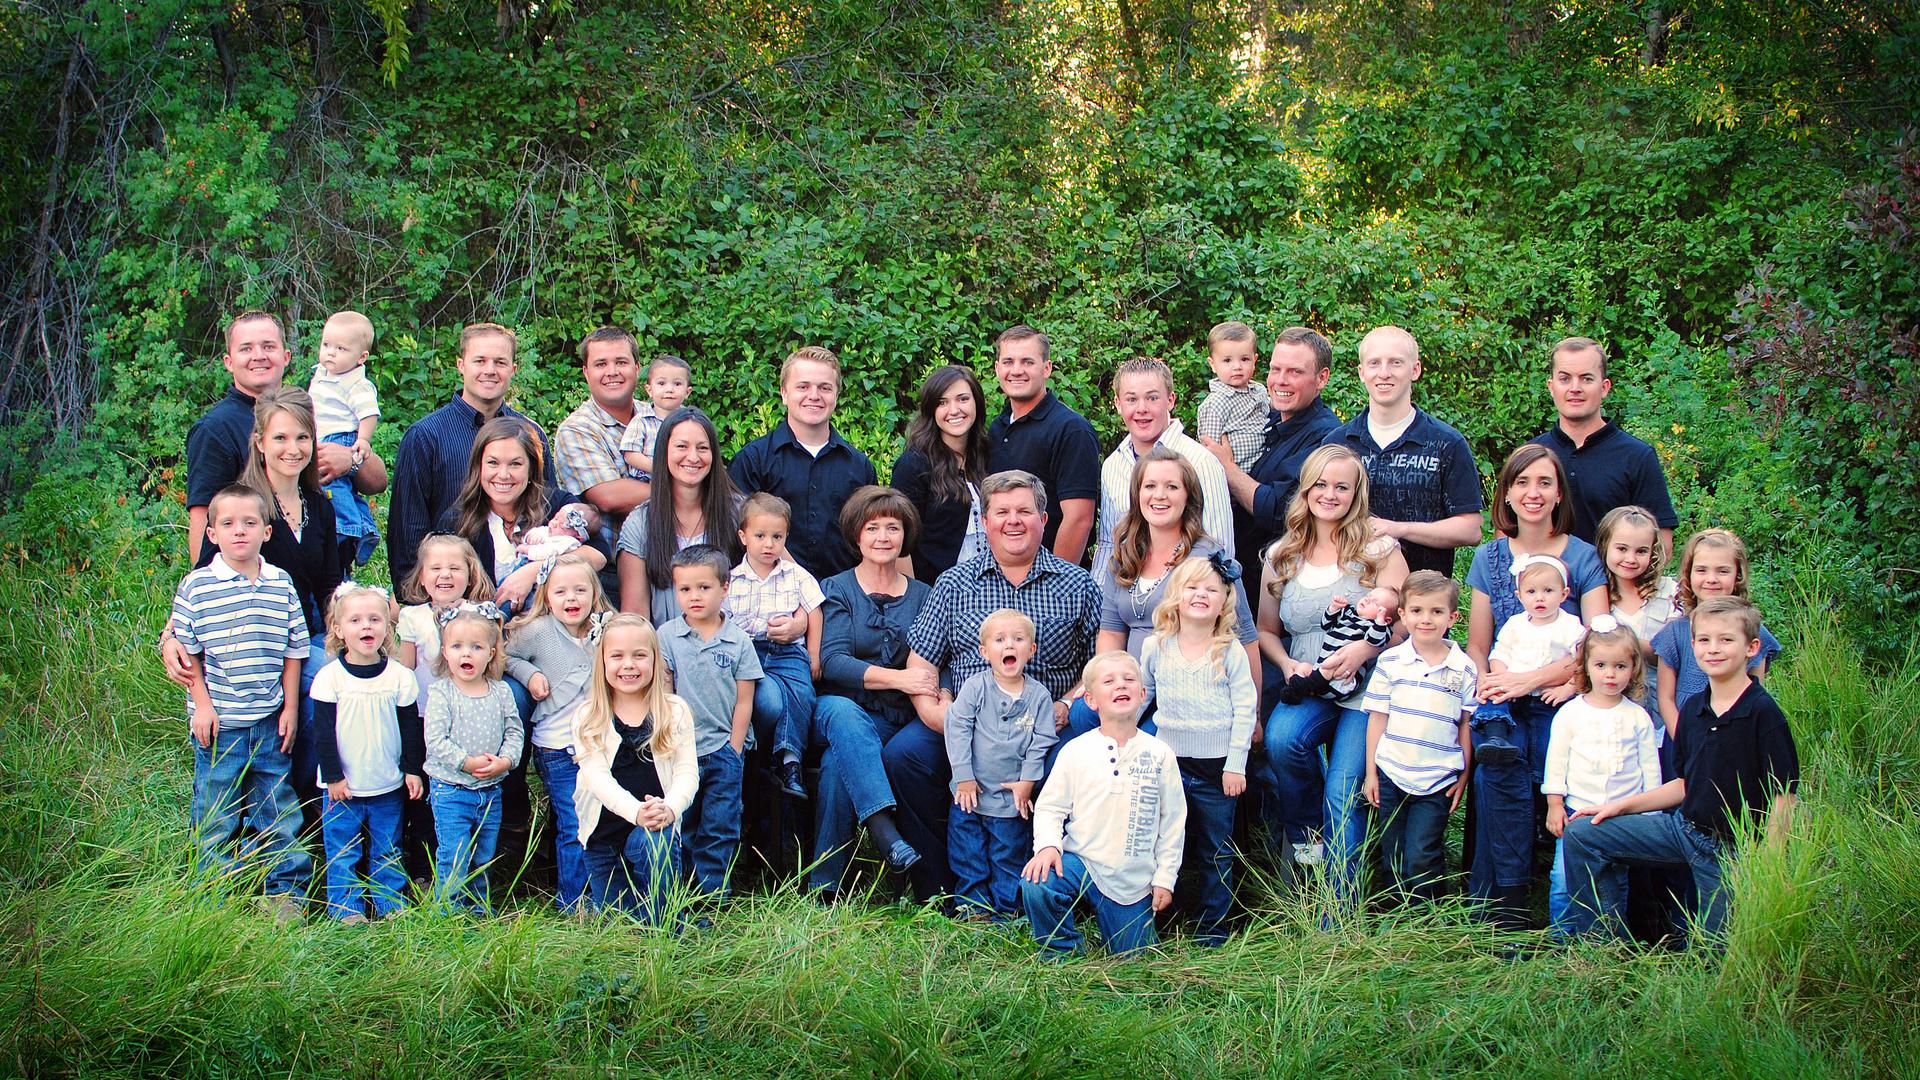 The Randy and Karen South family in 2012.